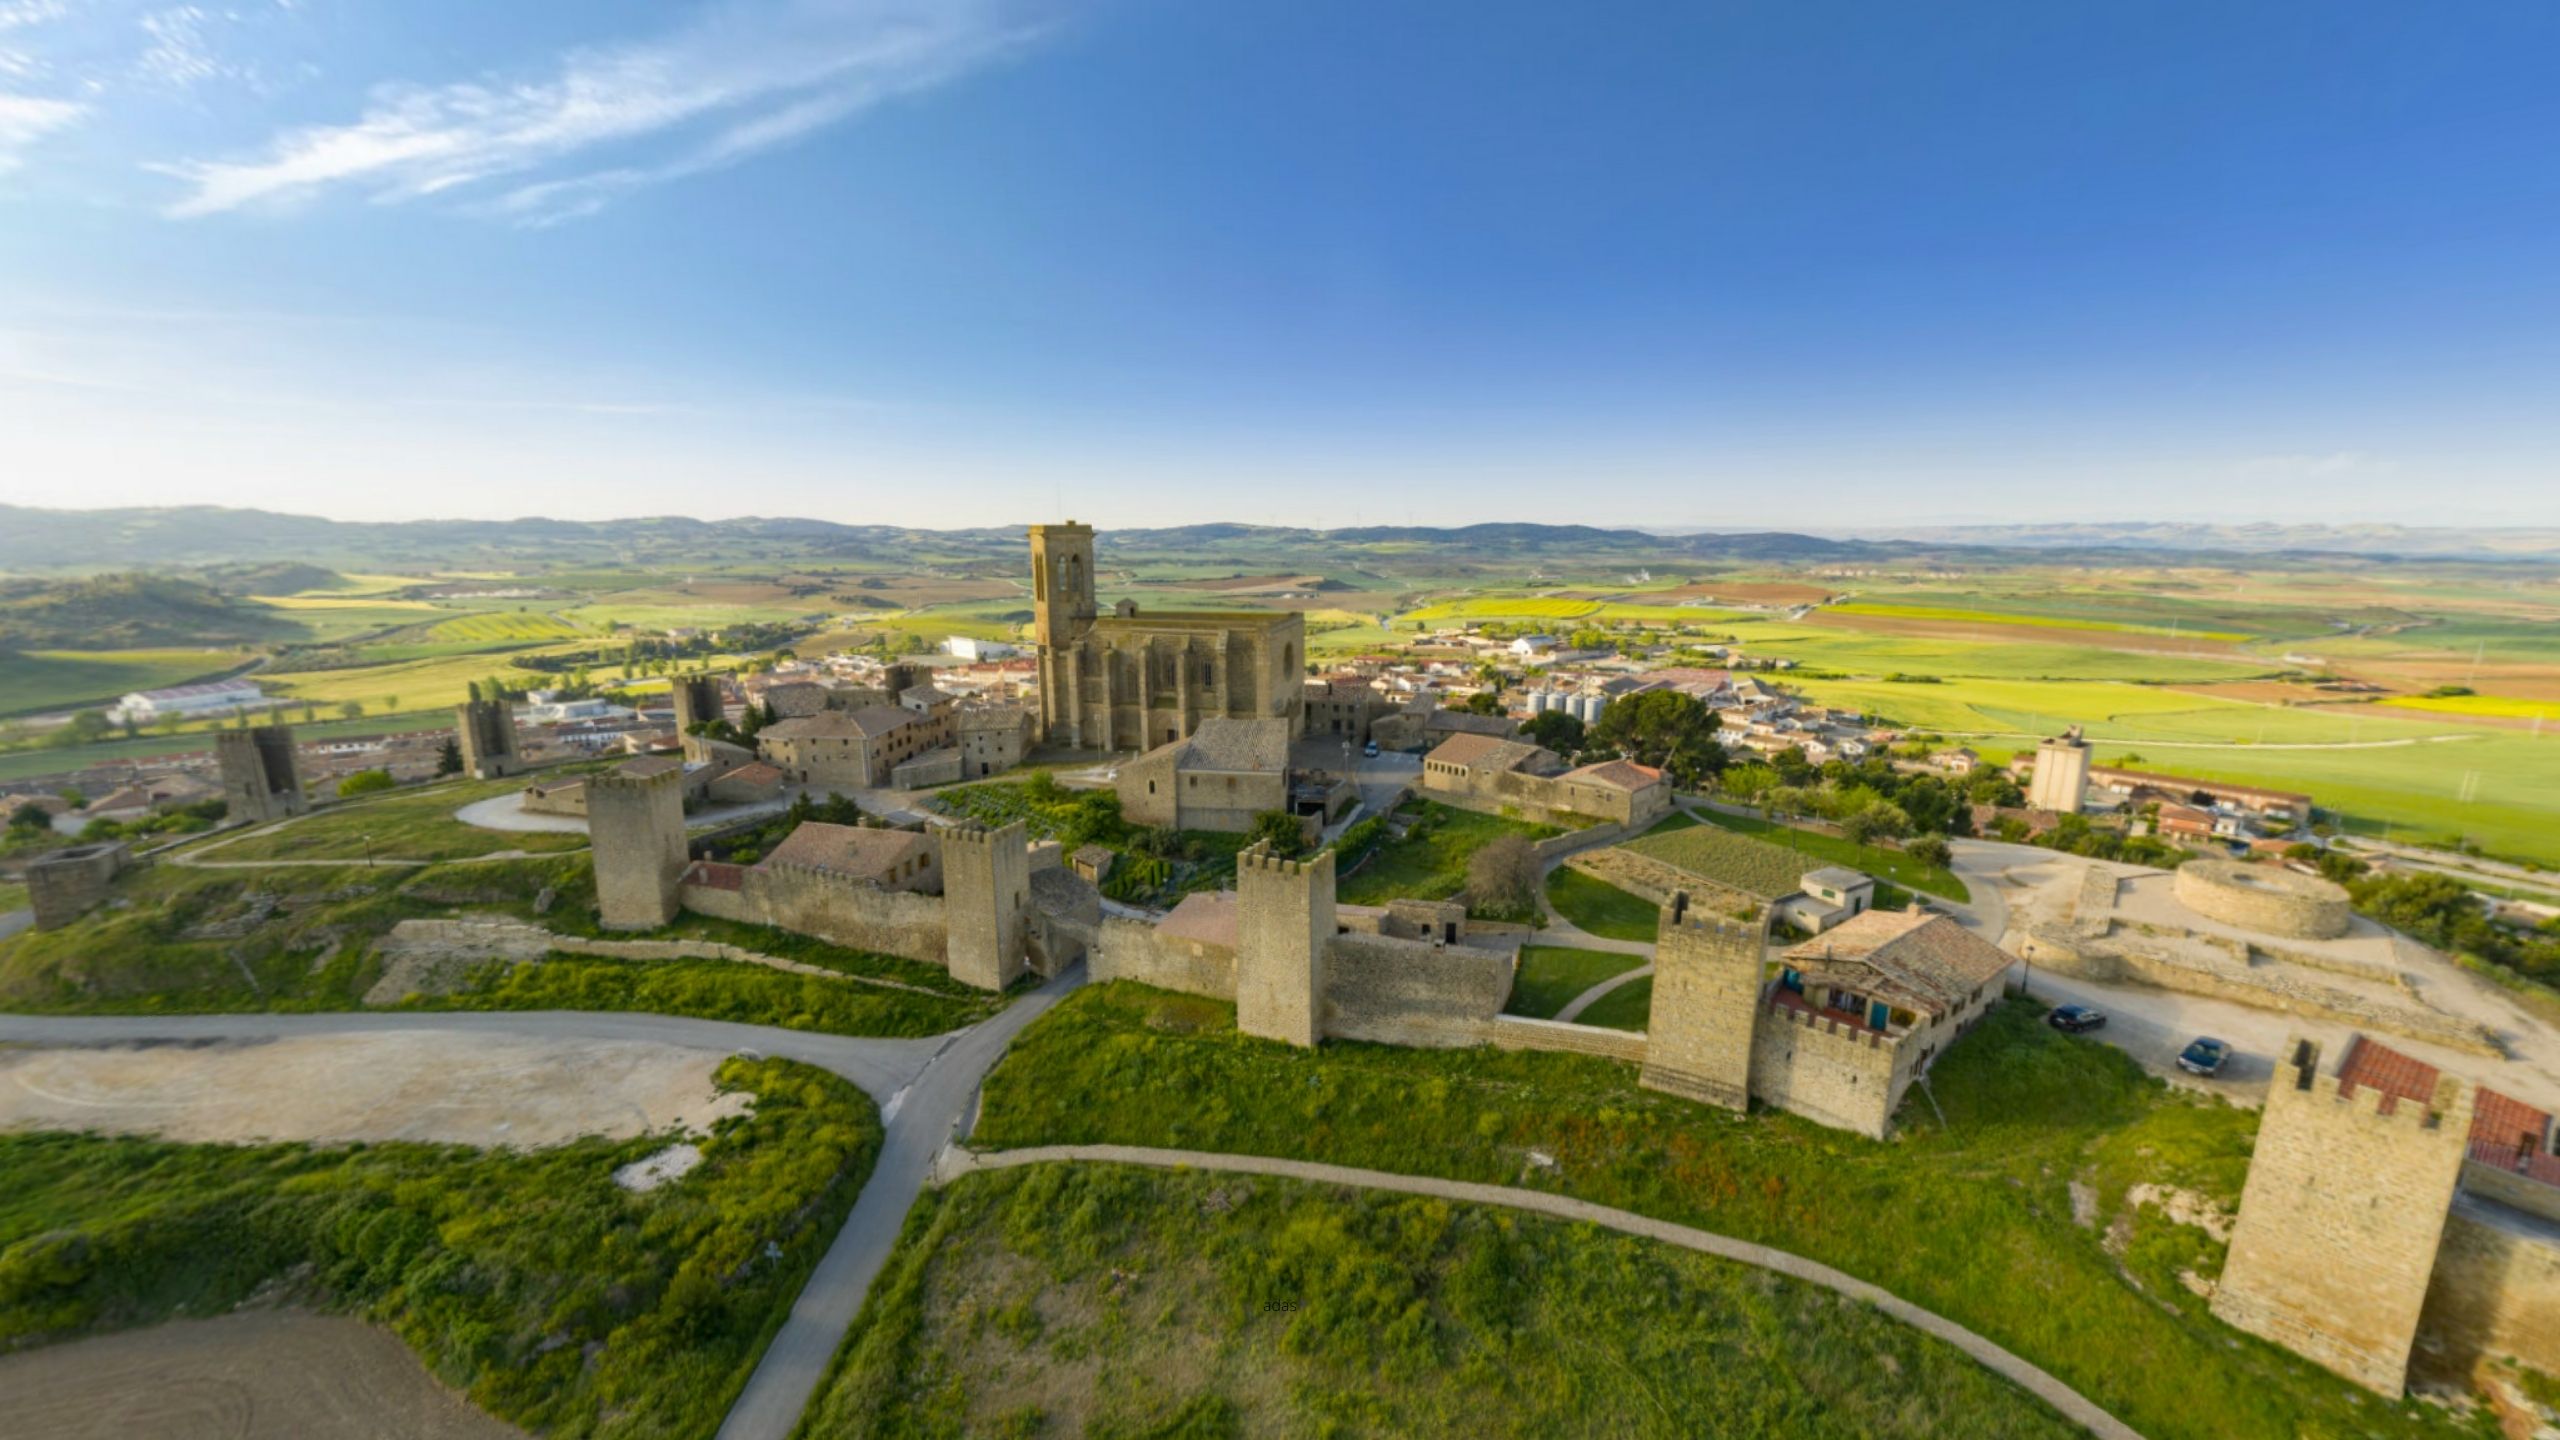 Visit the Fortified Enclosure of Artajona and the Church of San Saturnino.